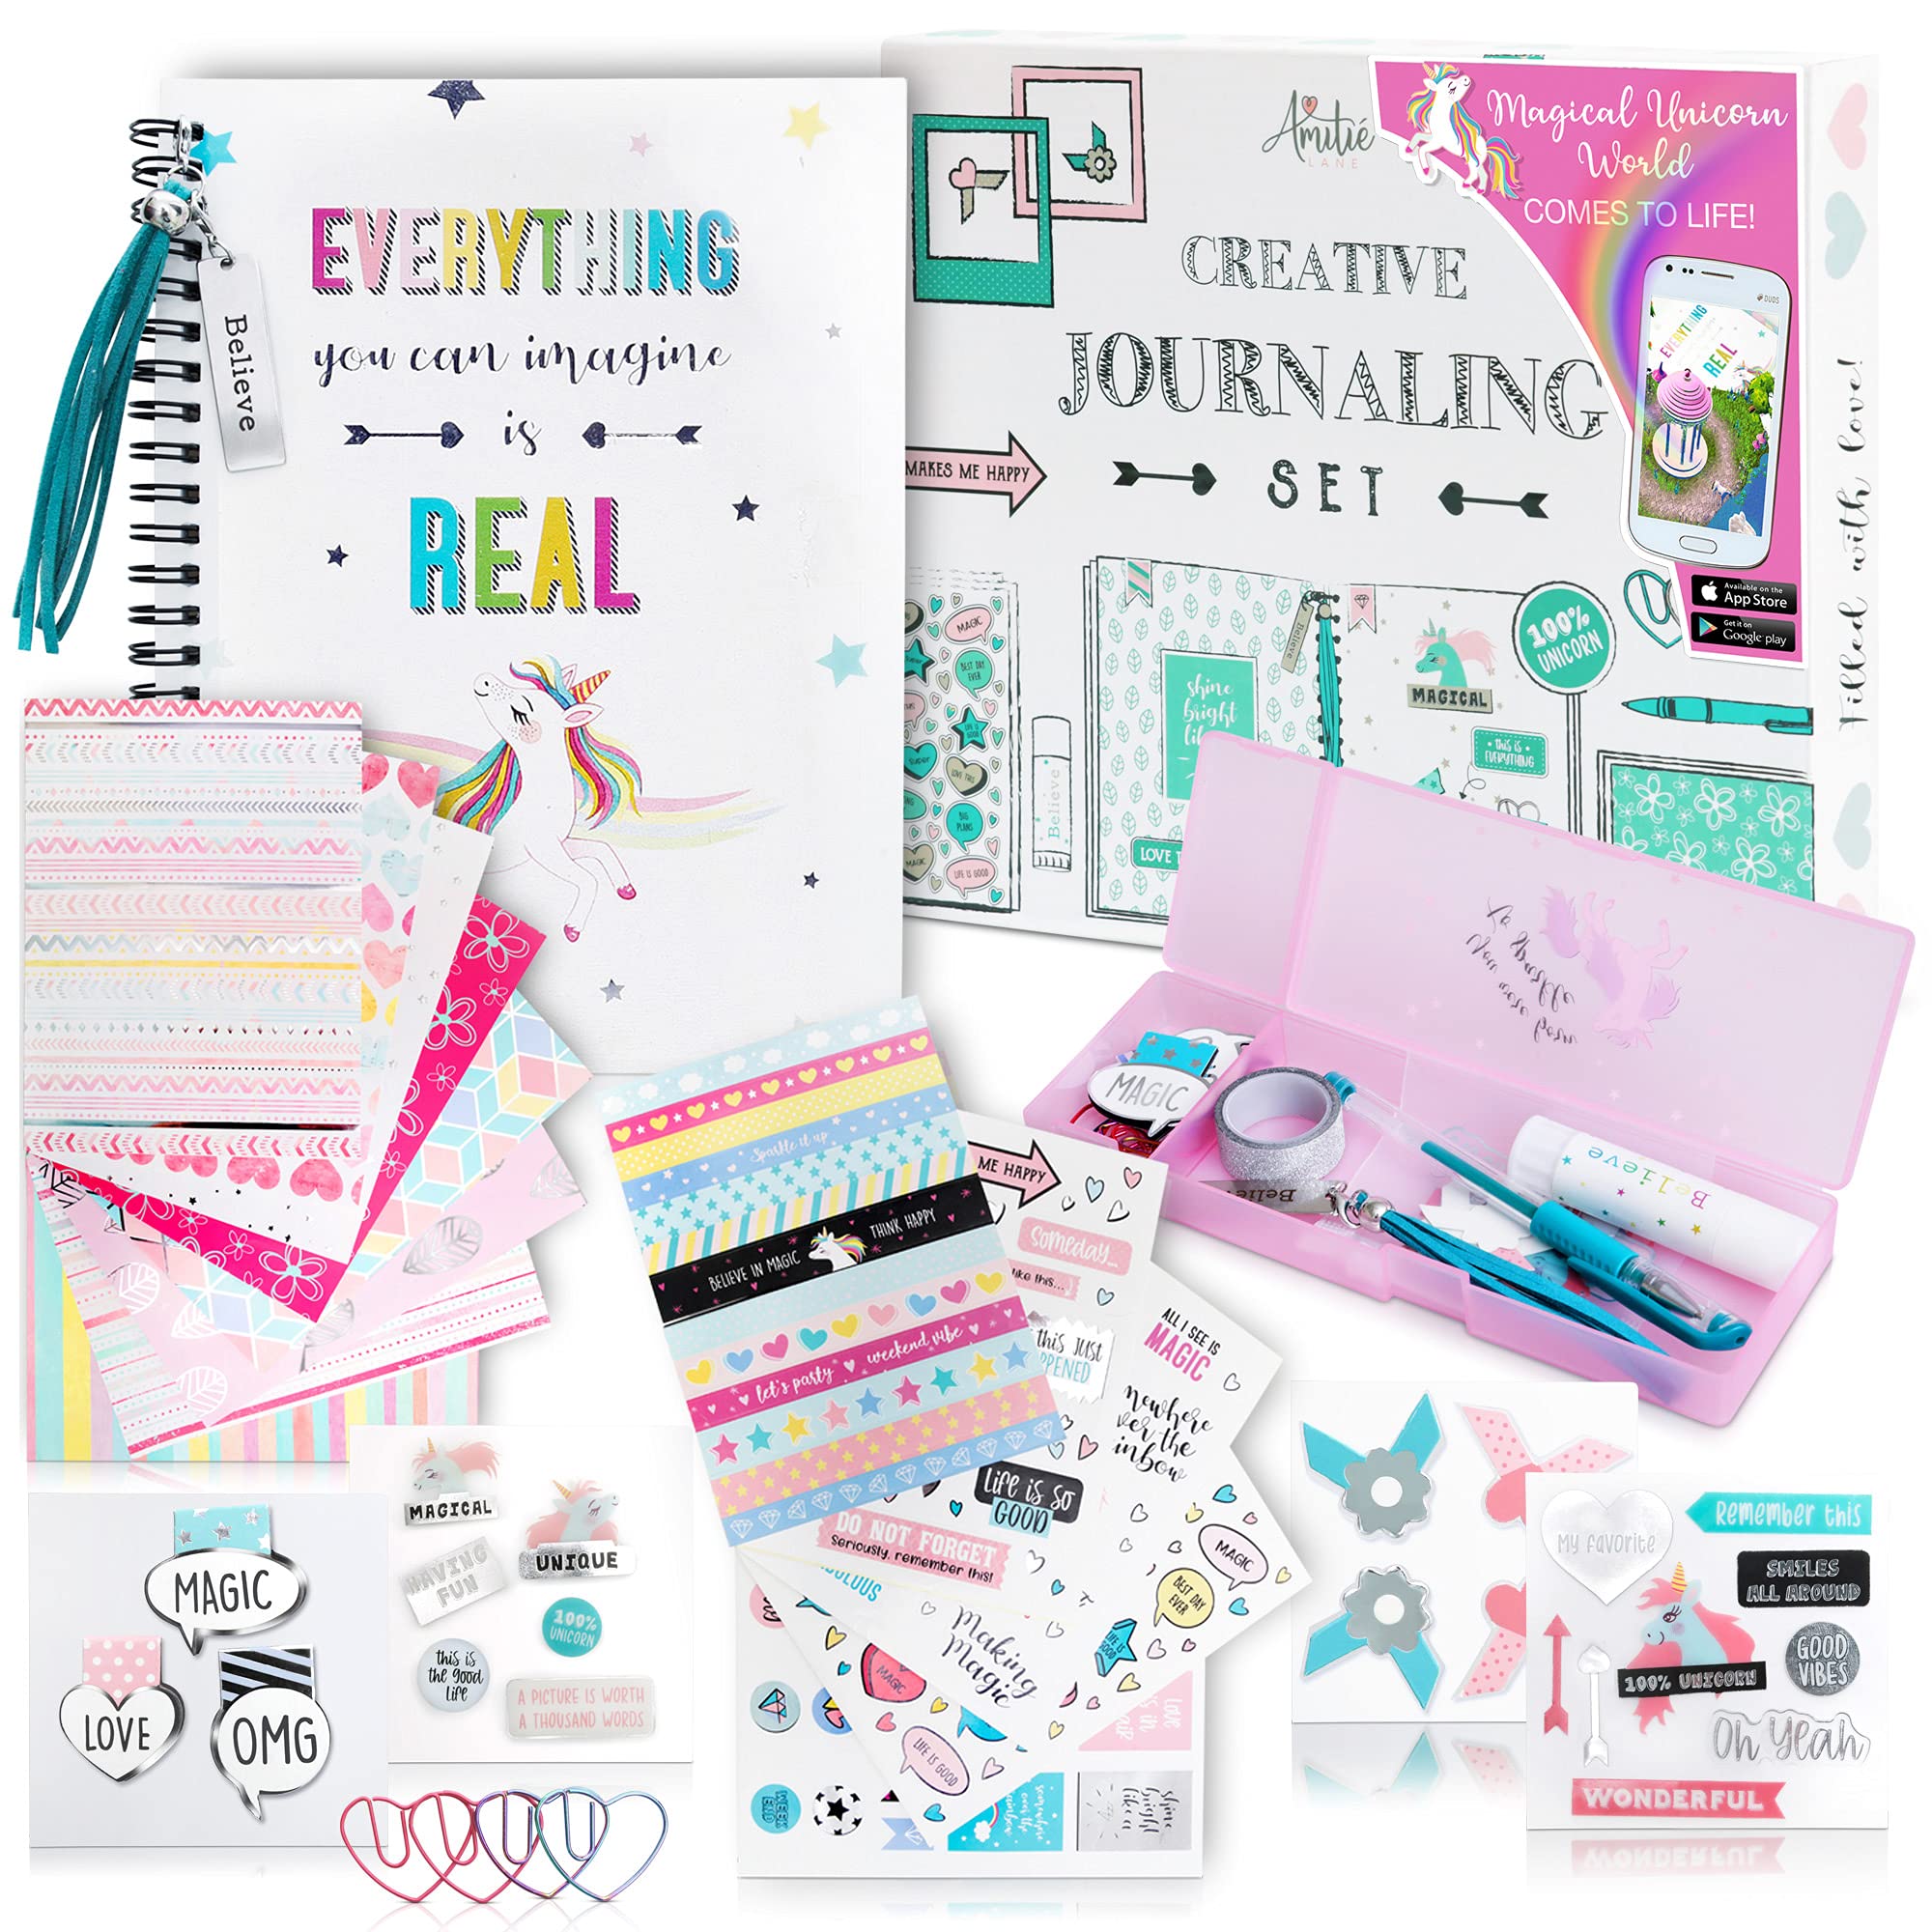 scrapbook kit for girls ages 8-12